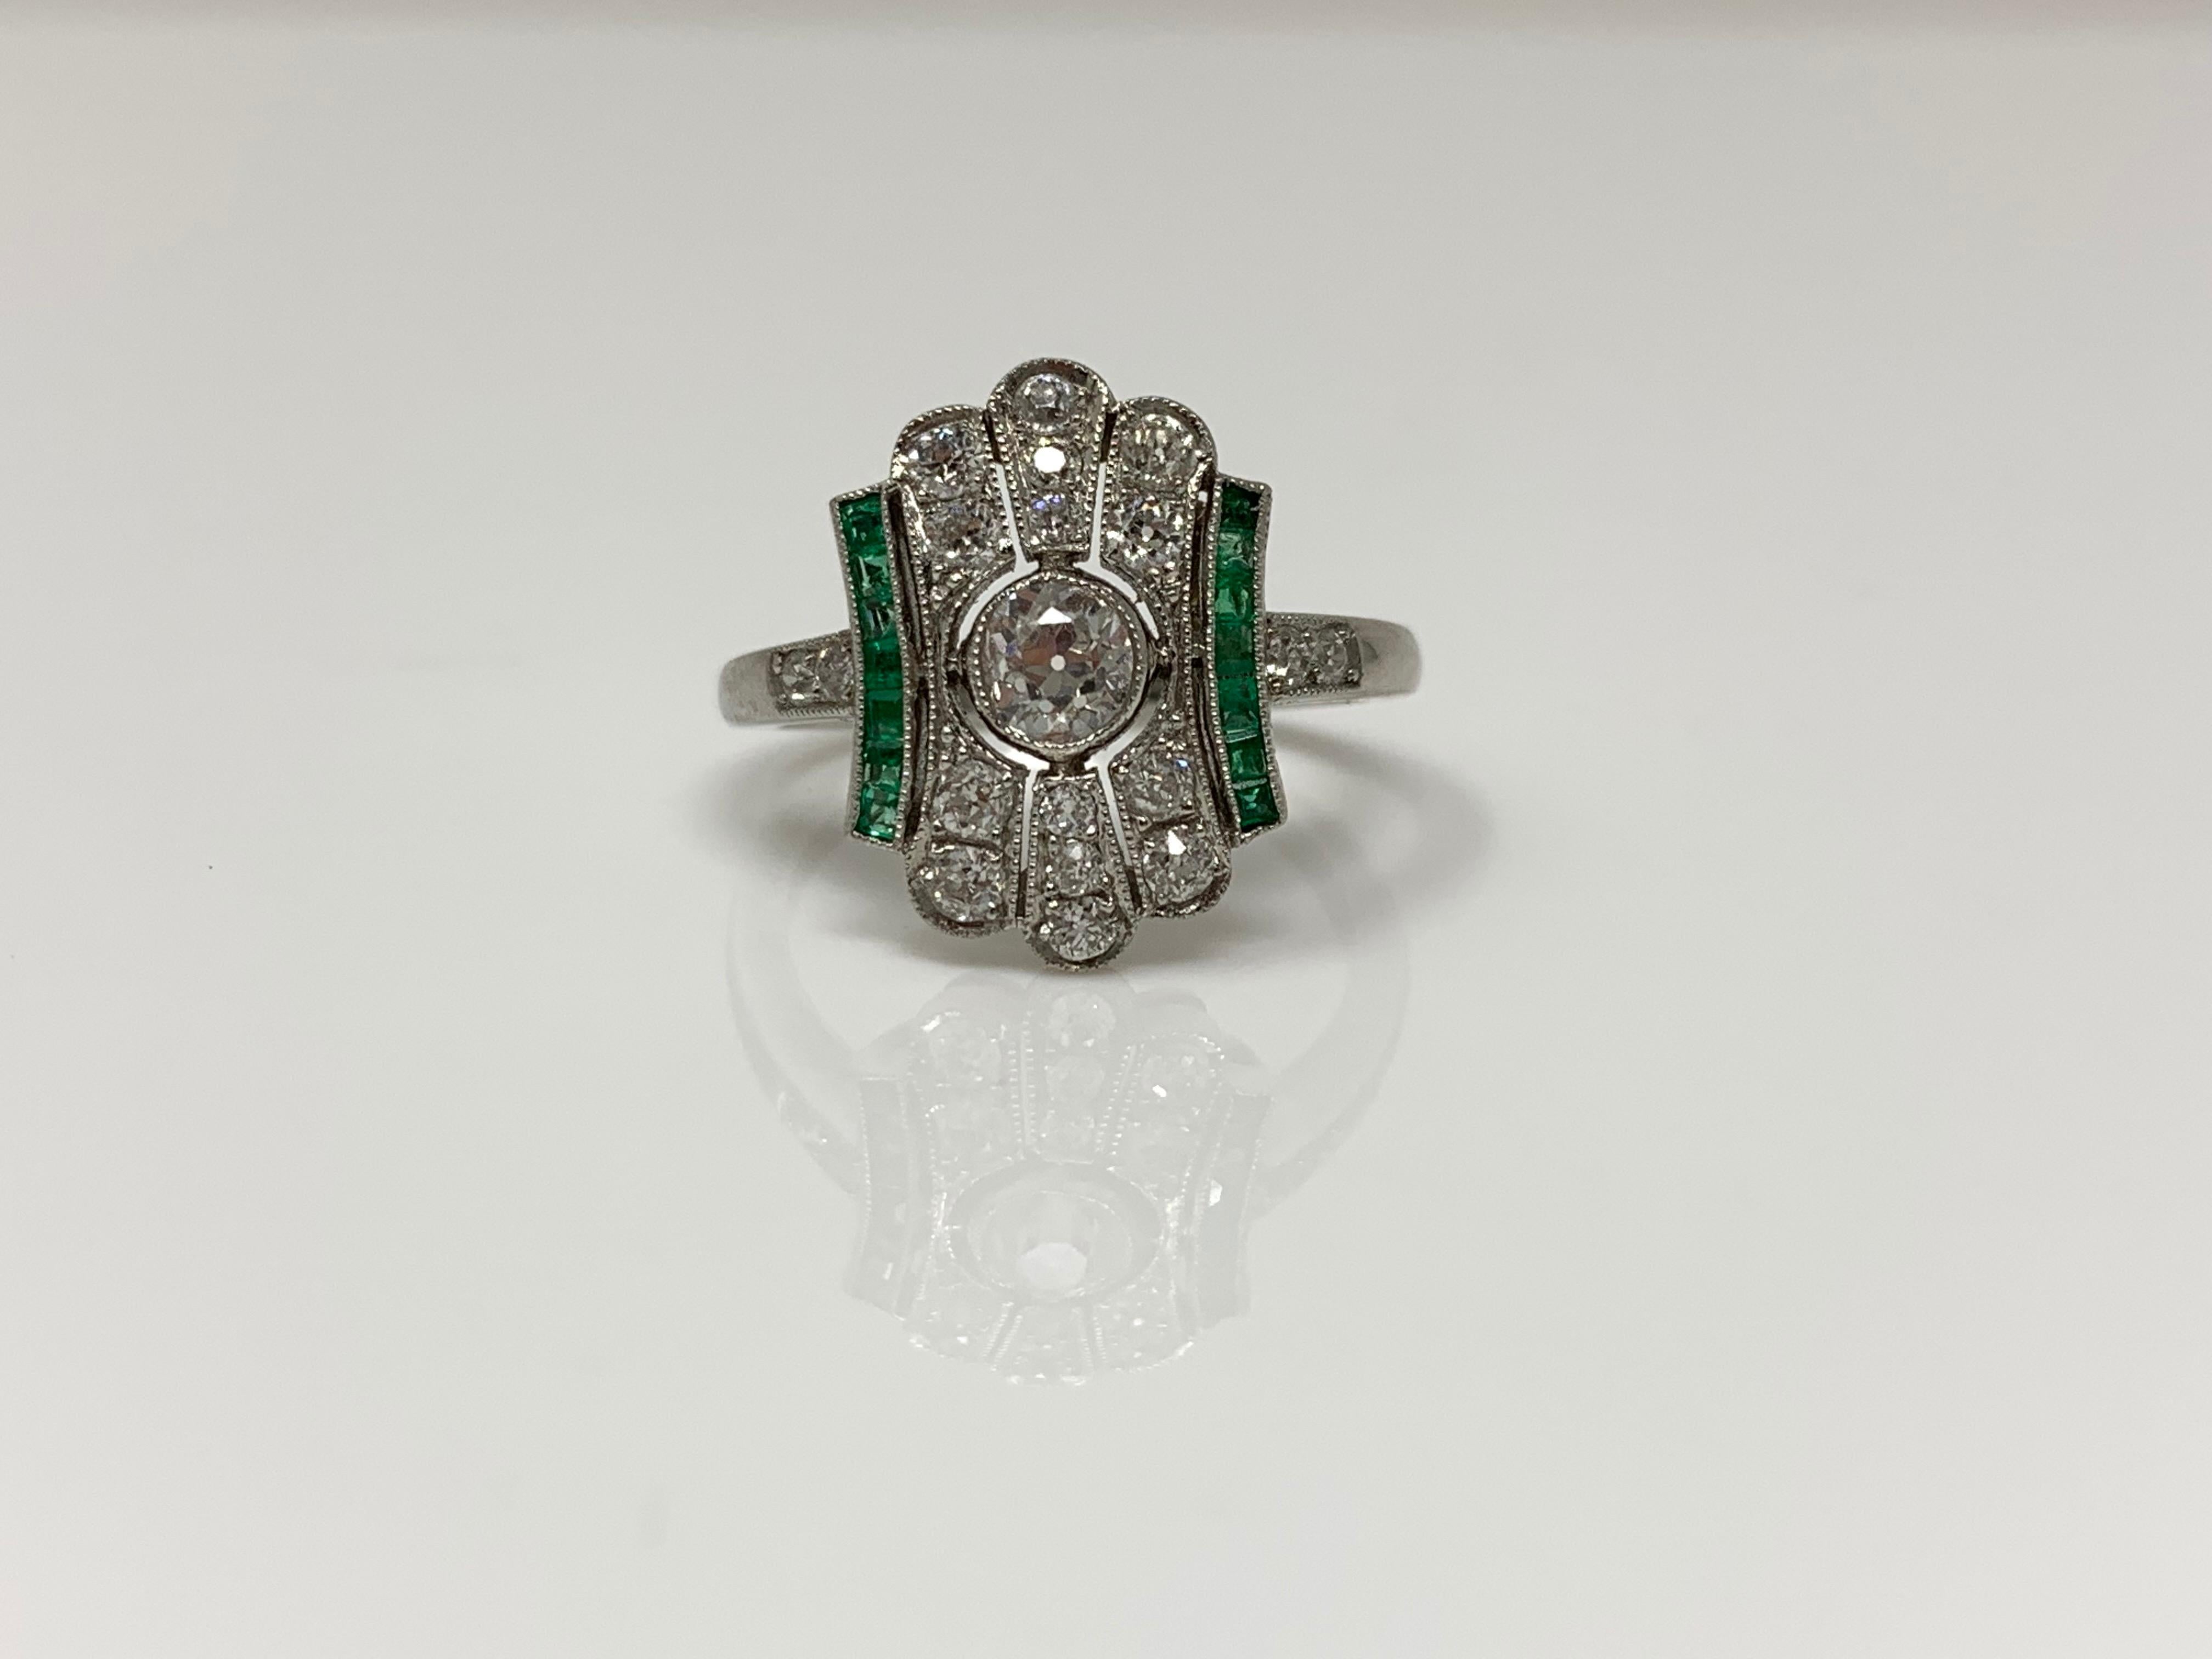 This gorgeous art in style deco ring is set with diamond and emerald. The ring is wonderfully hand crafted in platinum with diamonds weighing 0.80 carat with GH color and VS clarity  and emerald weighing 0.30 carat. The ring size is 6 and can be